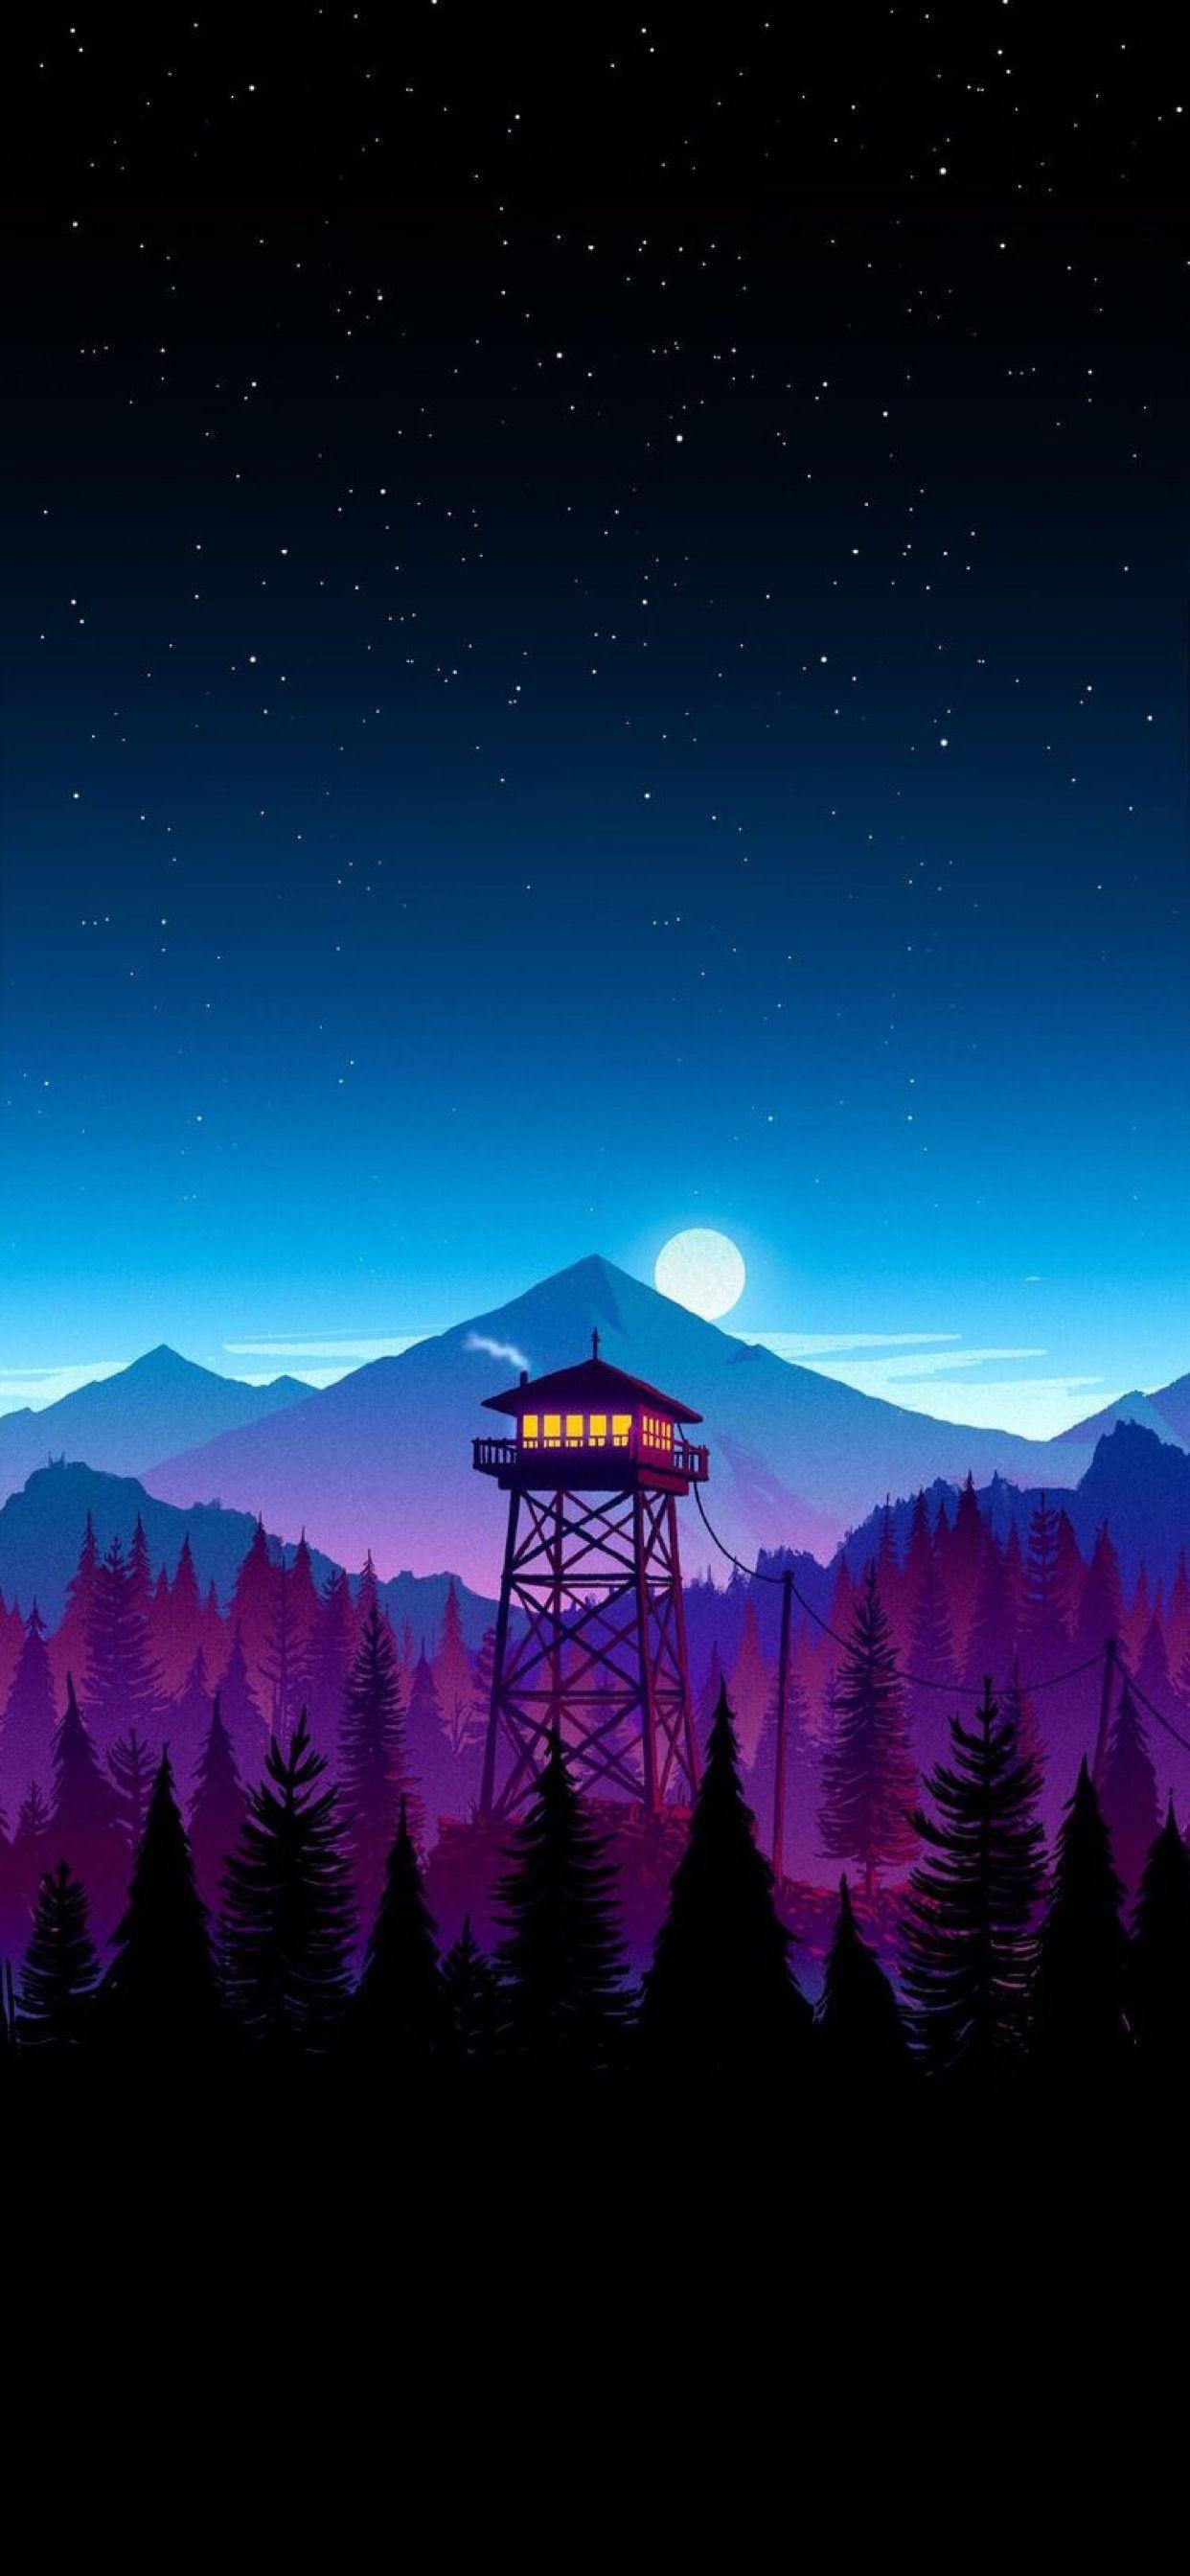 Low poly Watchtower. Minimalist wallpaper, iPhone